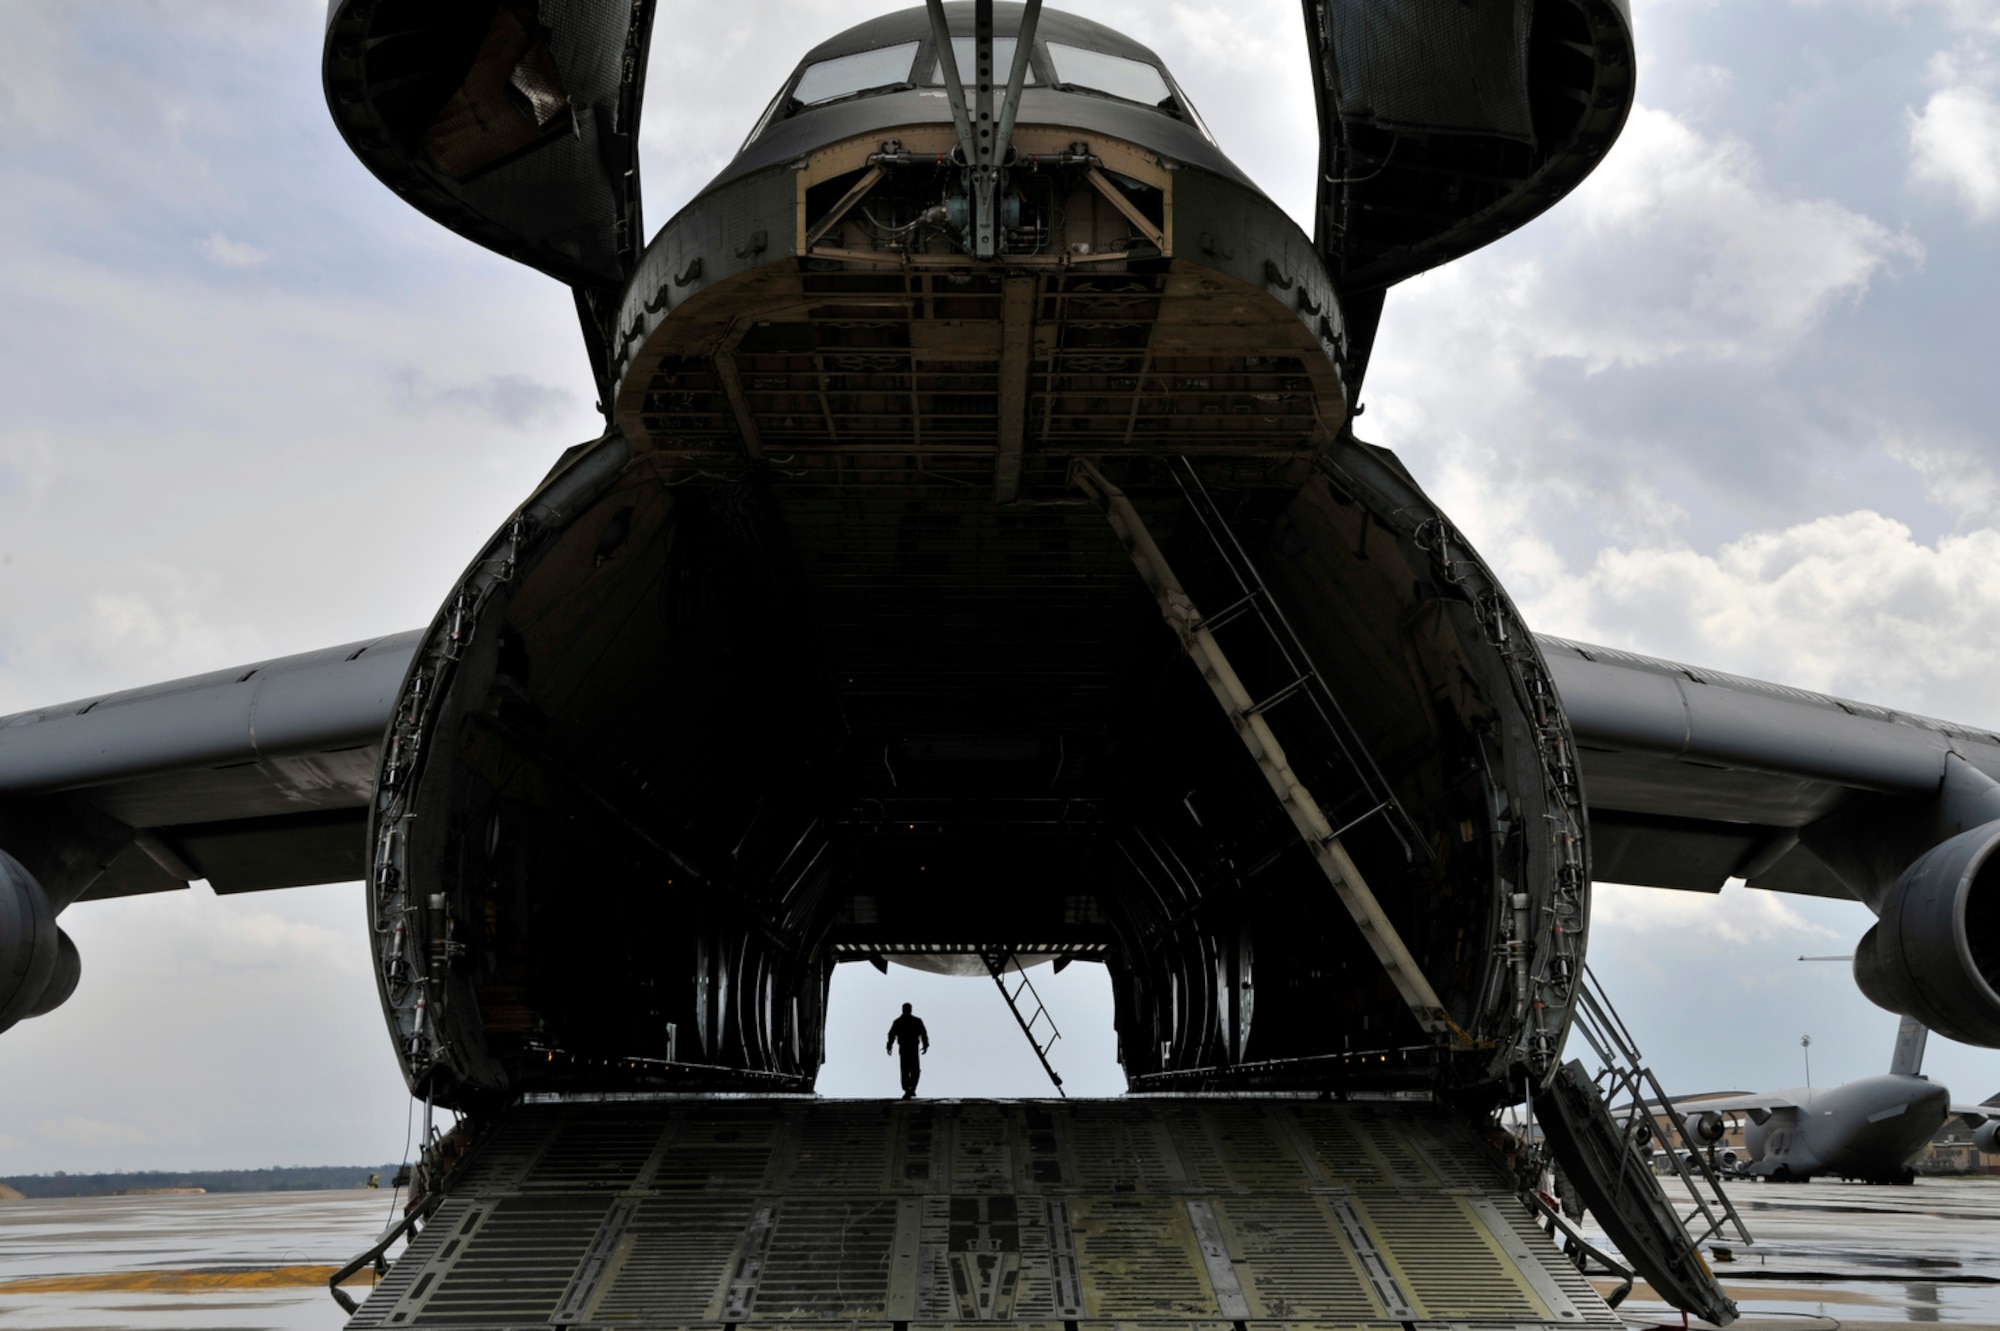 Airmen prepare a C-5 Galaxy for cargo, April 2, at Joint Base Andrews, Md. Ground crews are able to load and off-load the C-5 simultaneously at the front and rear cargo openings, reducing cargo transfer times. (U.S. Air Force photo/Senior Airman Perry Aston)